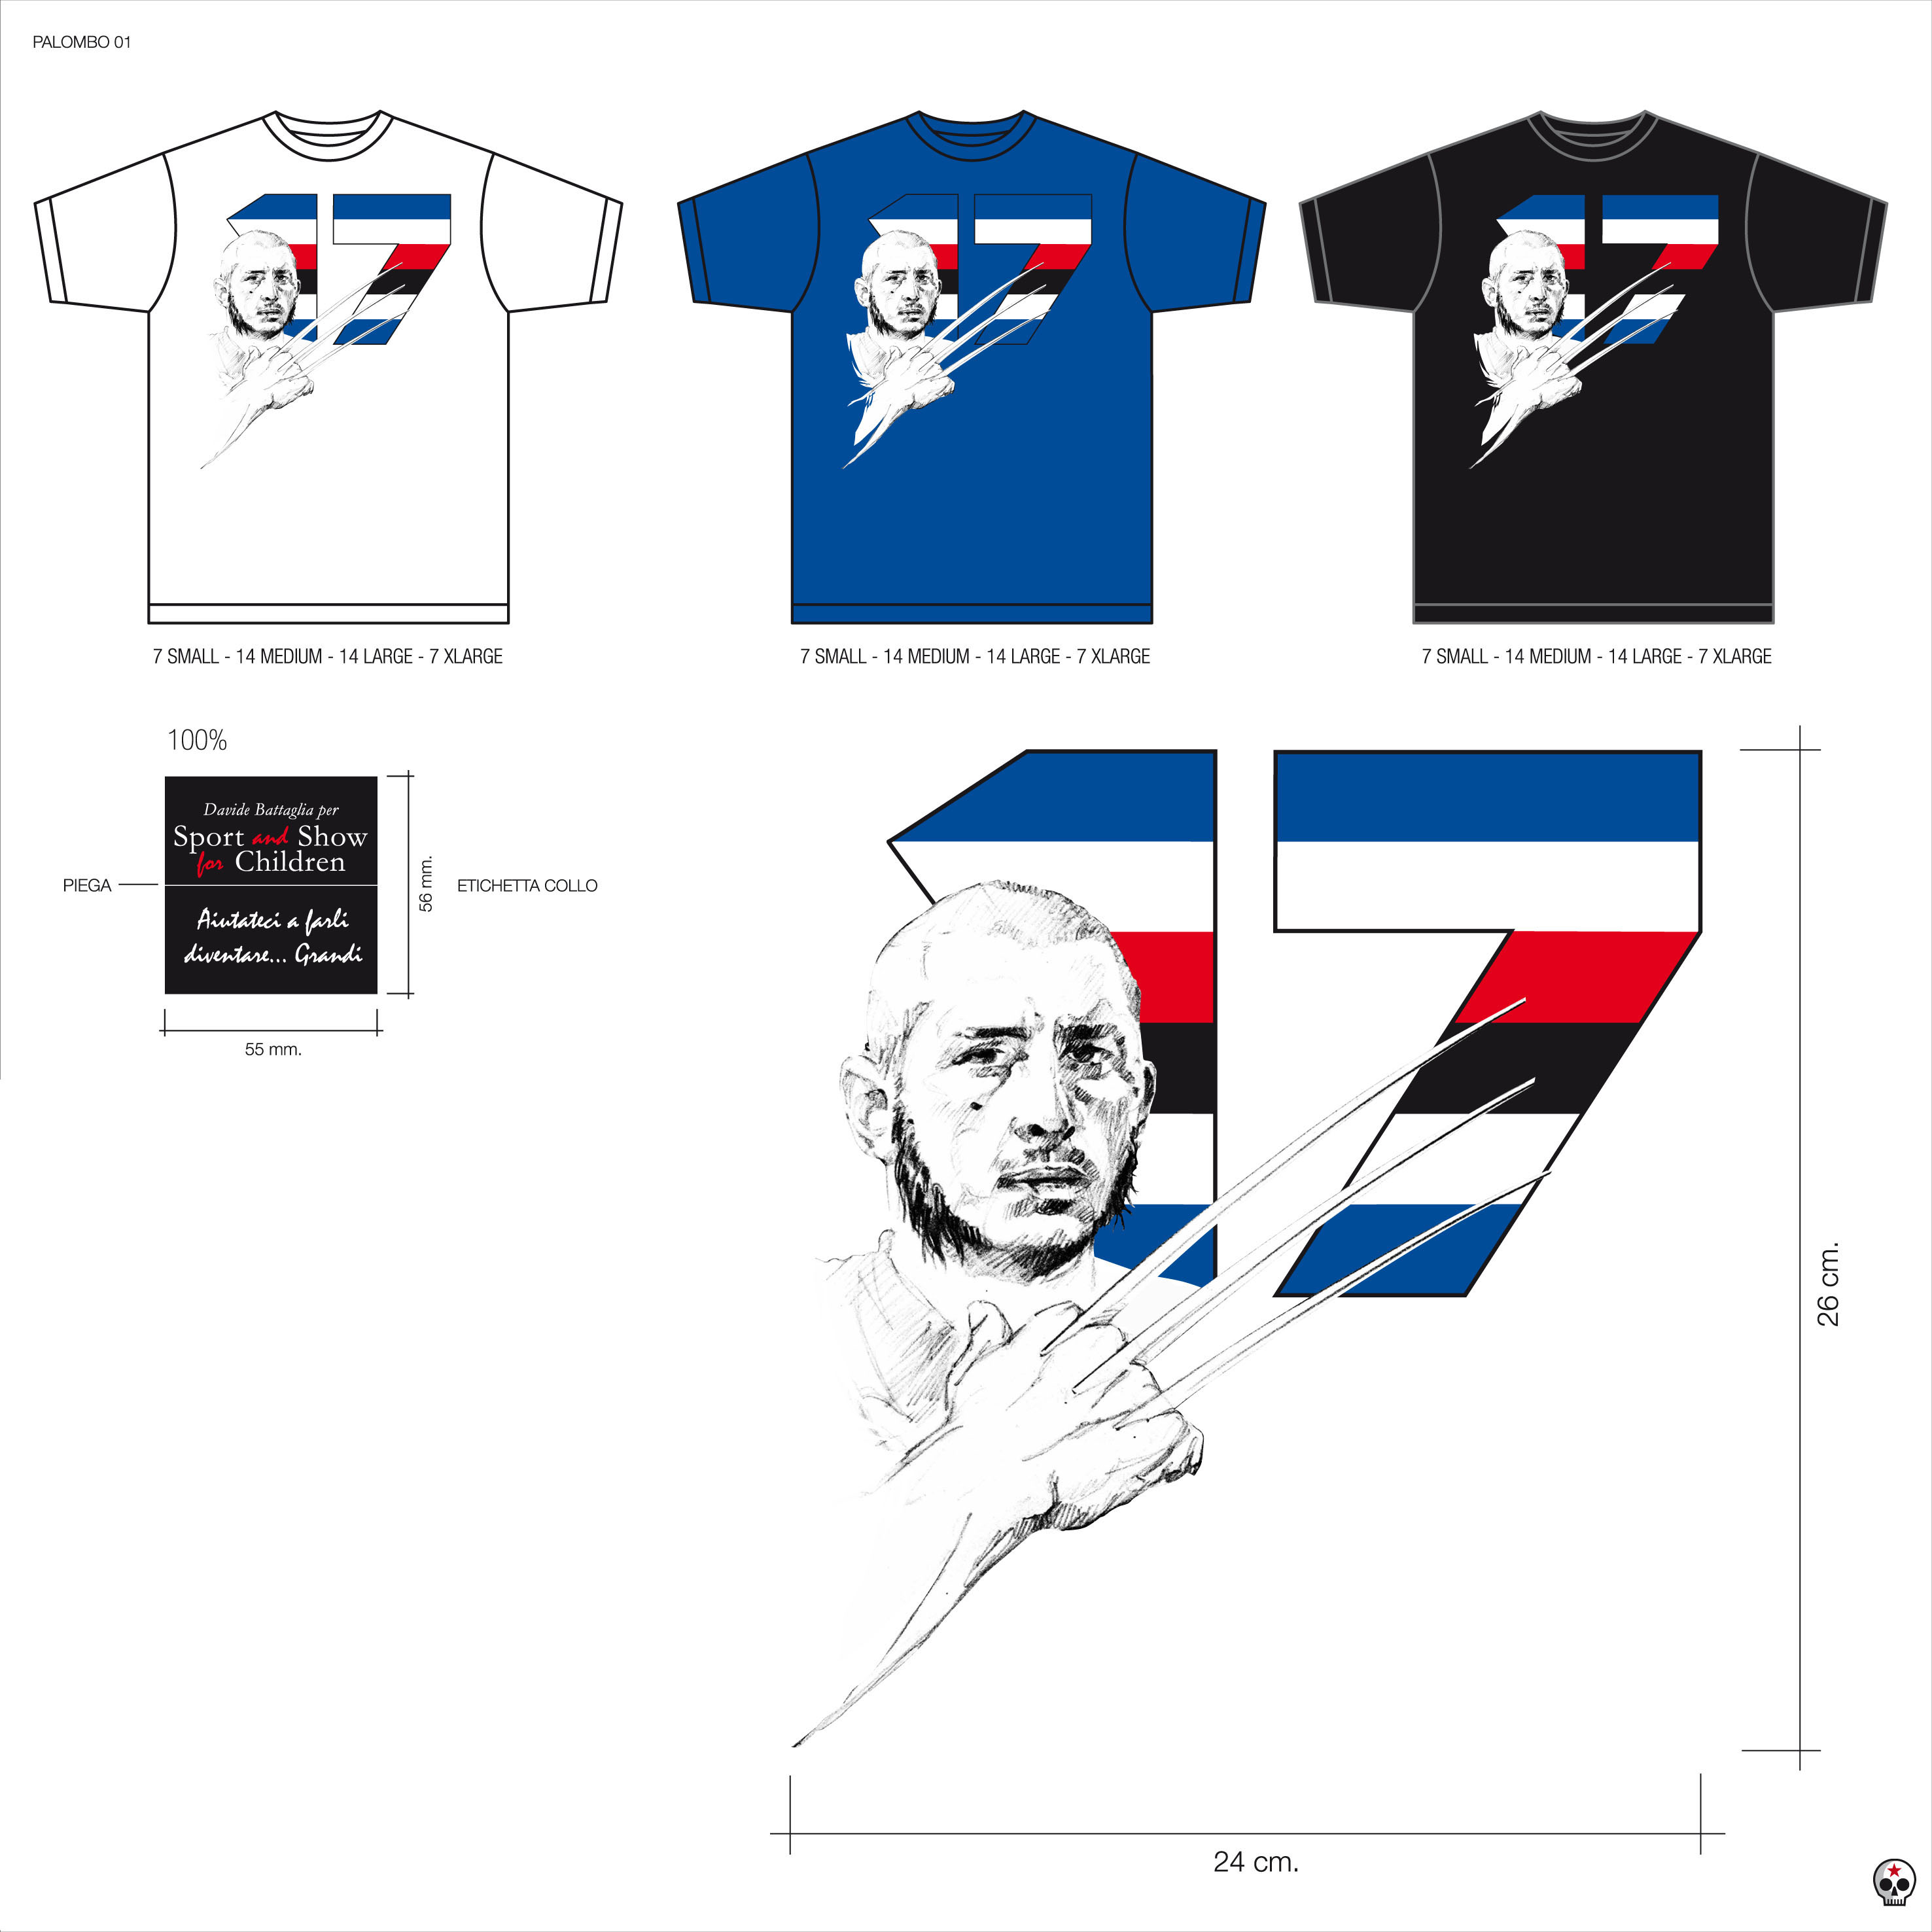 2008 - Drawings for the t-shirts and sweatshirts line 'Palombo Supereroe', in partnership Sport&Show for Children and Sampdoria Point